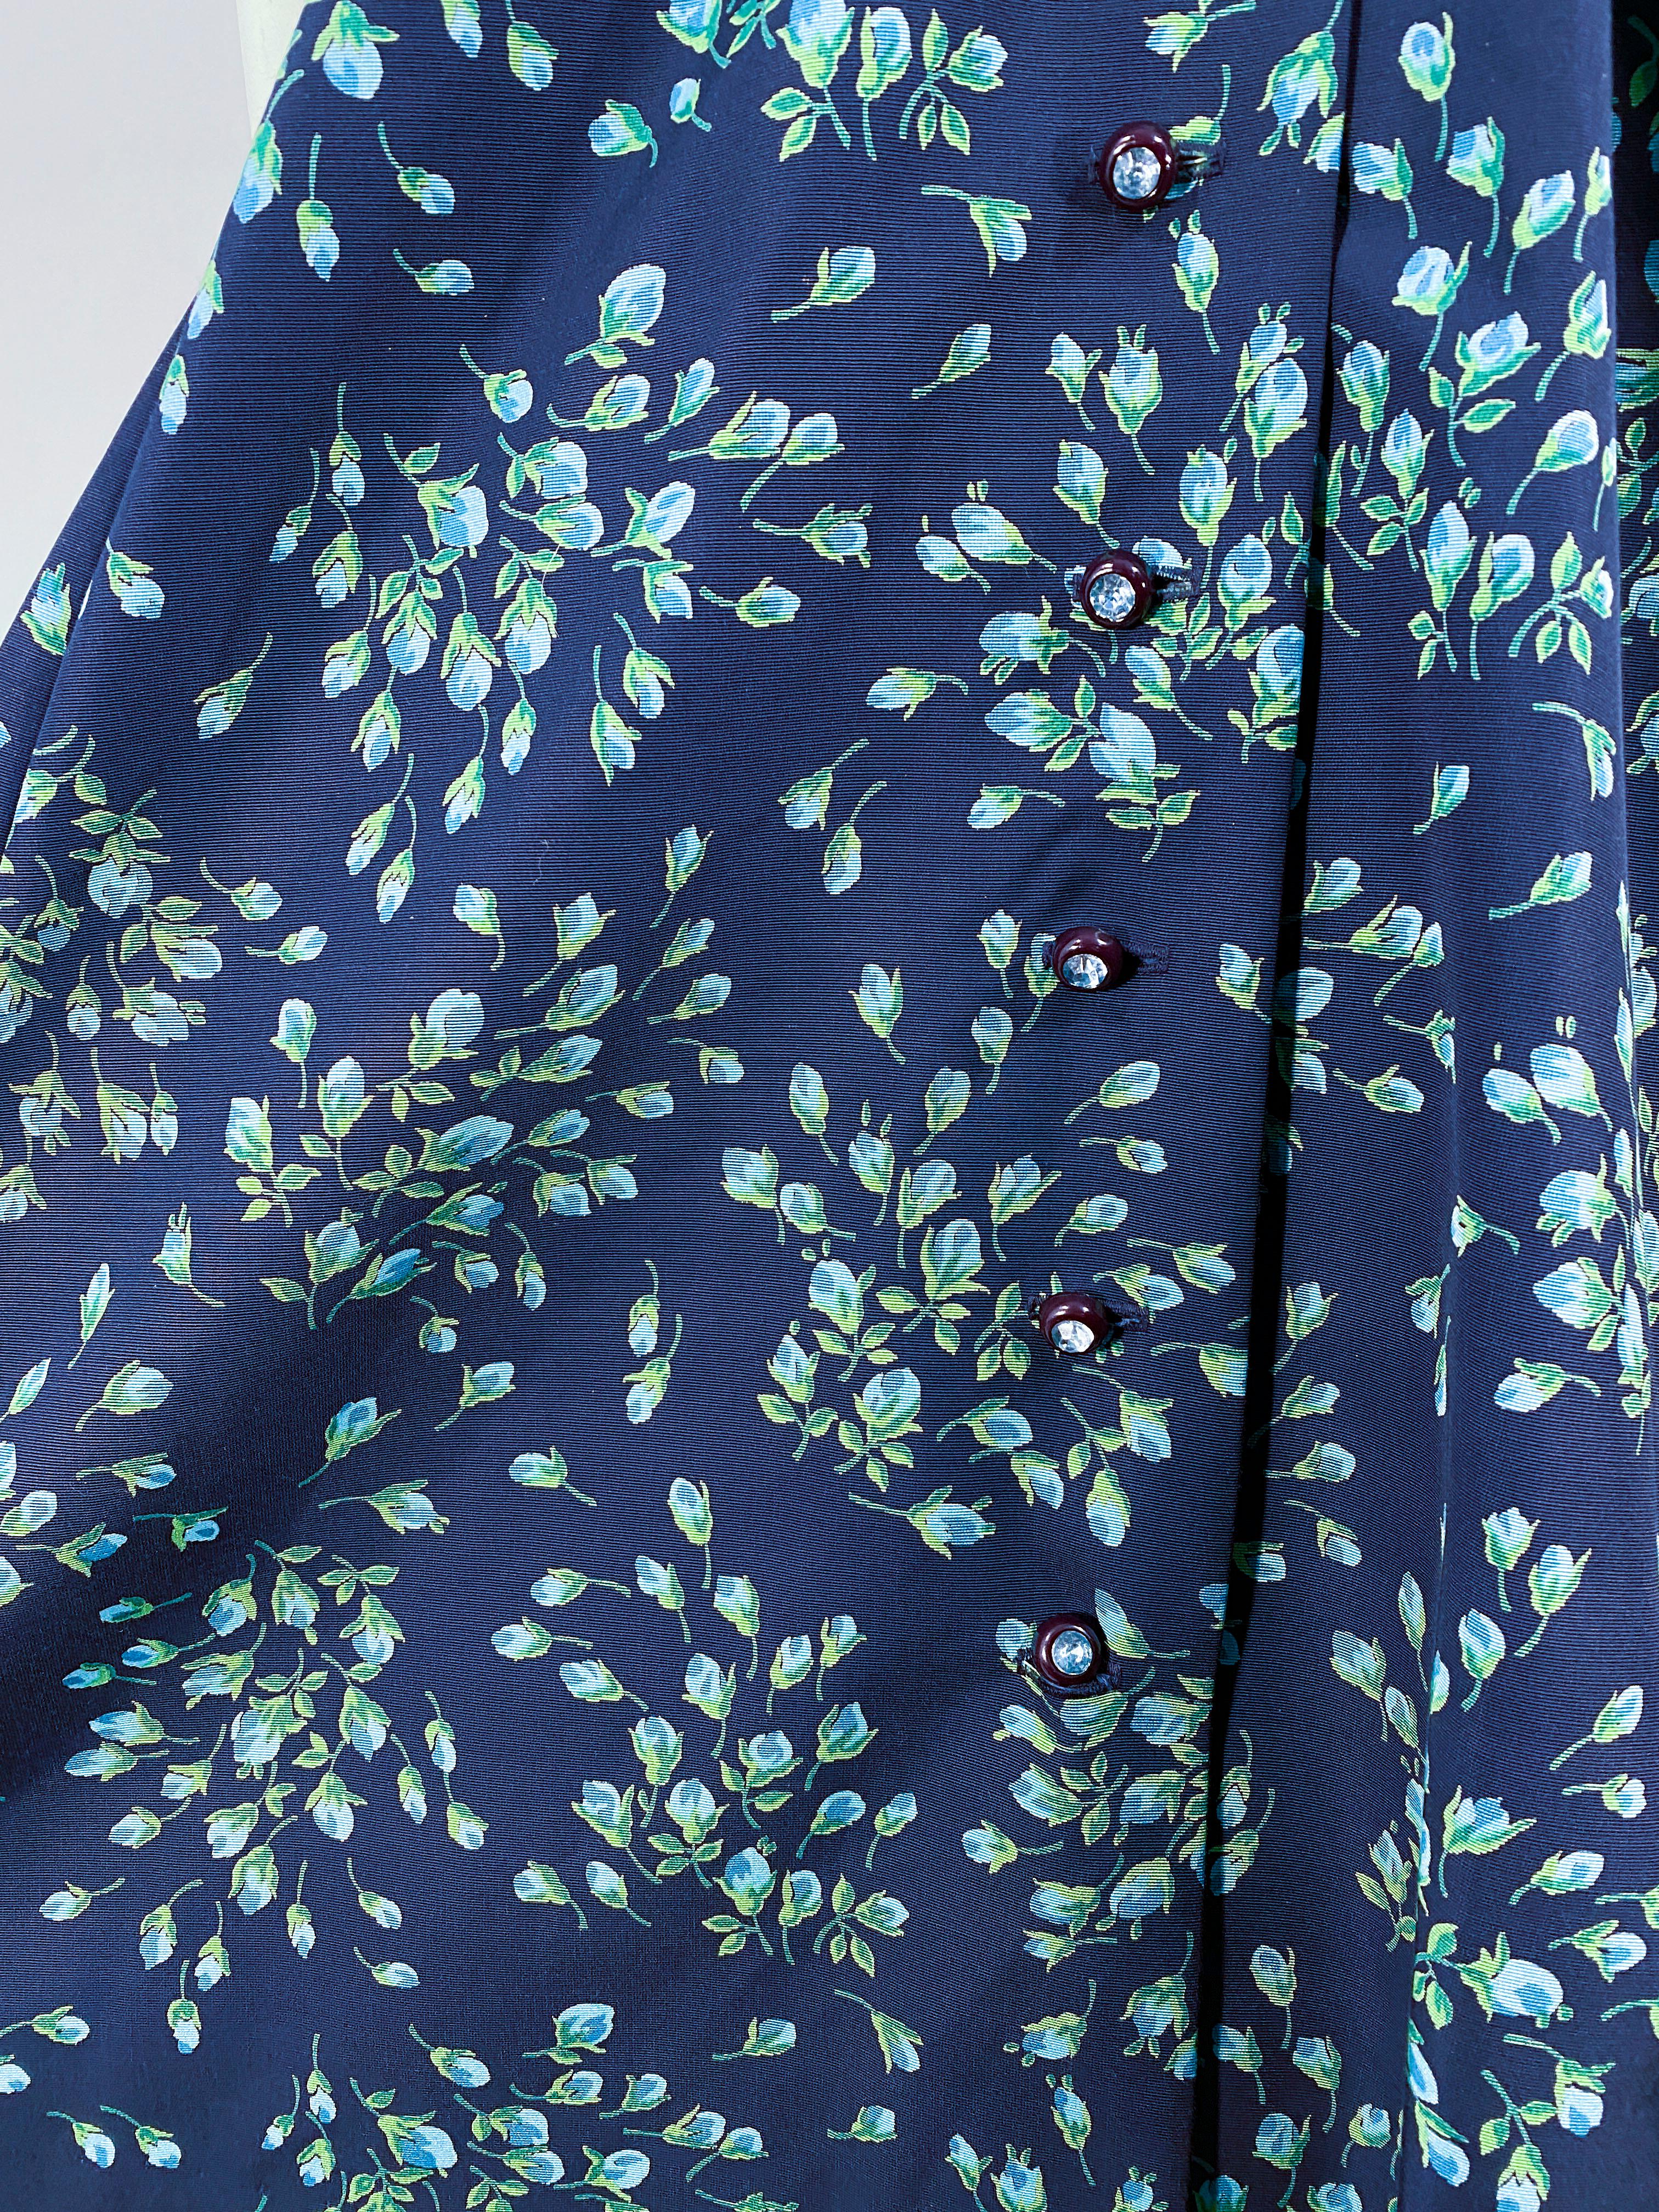 1950s Navy Blue Floral Printed Dress In Good Condition For Sale In San Francisco, CA